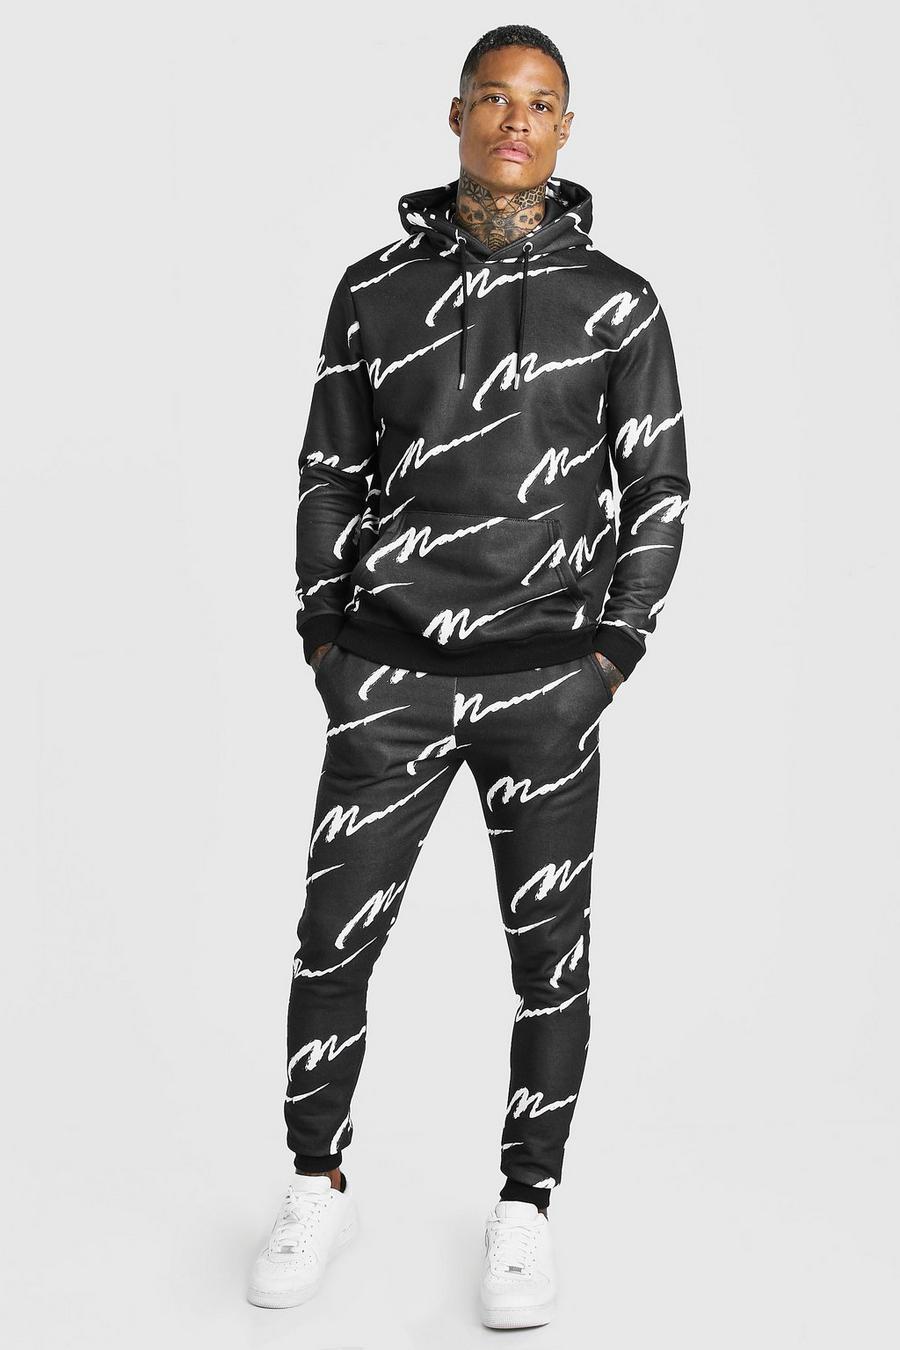 All Over MAN Printed Hooded Tracksuit | boohoo